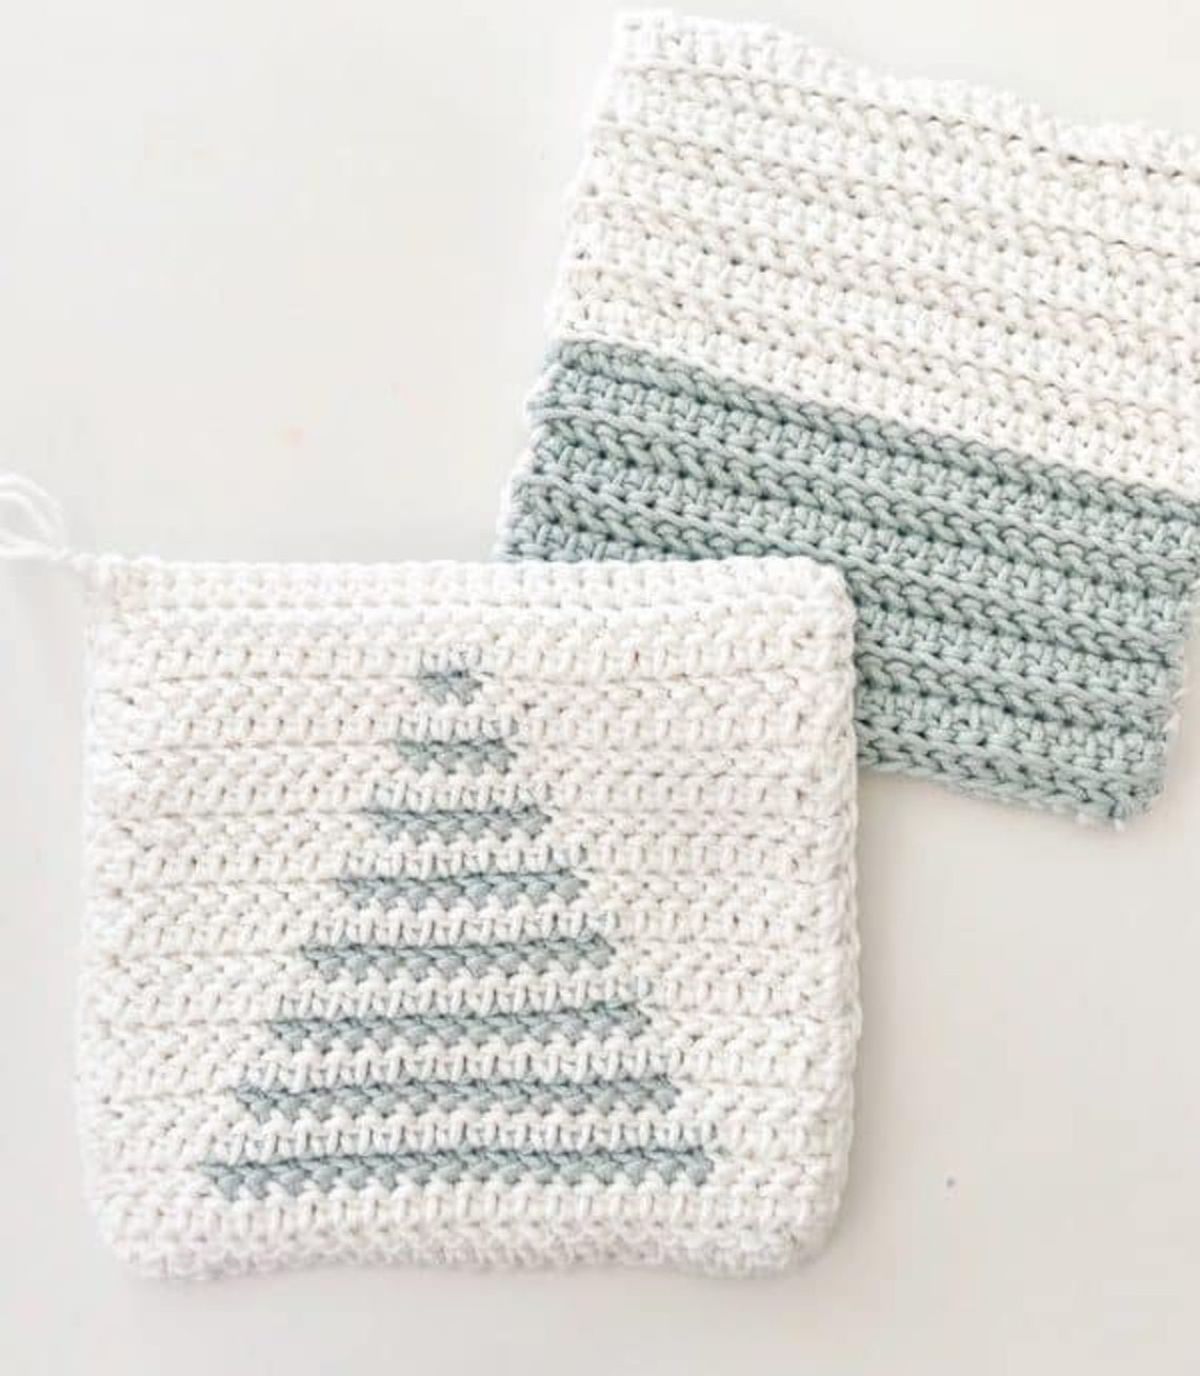 A white crochet potholder with a light green Christmas tree in the center next to a striped white and green potholder.